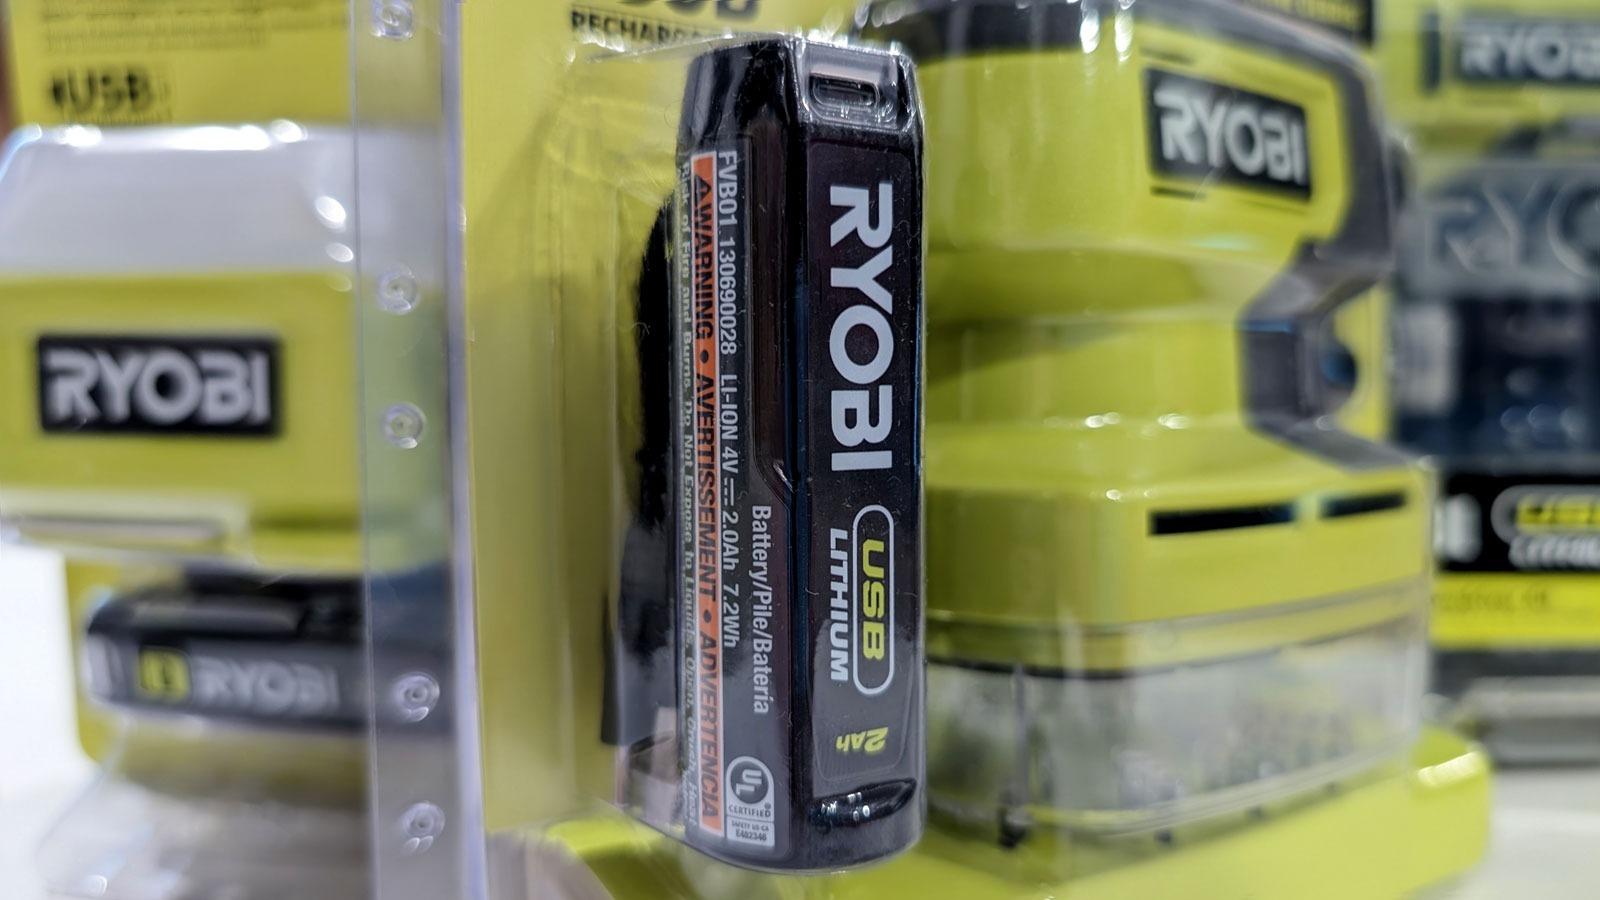 We Tested Ryobi’s Latest USB Lithium Tools: Essential Insights Before Making Your Purchase